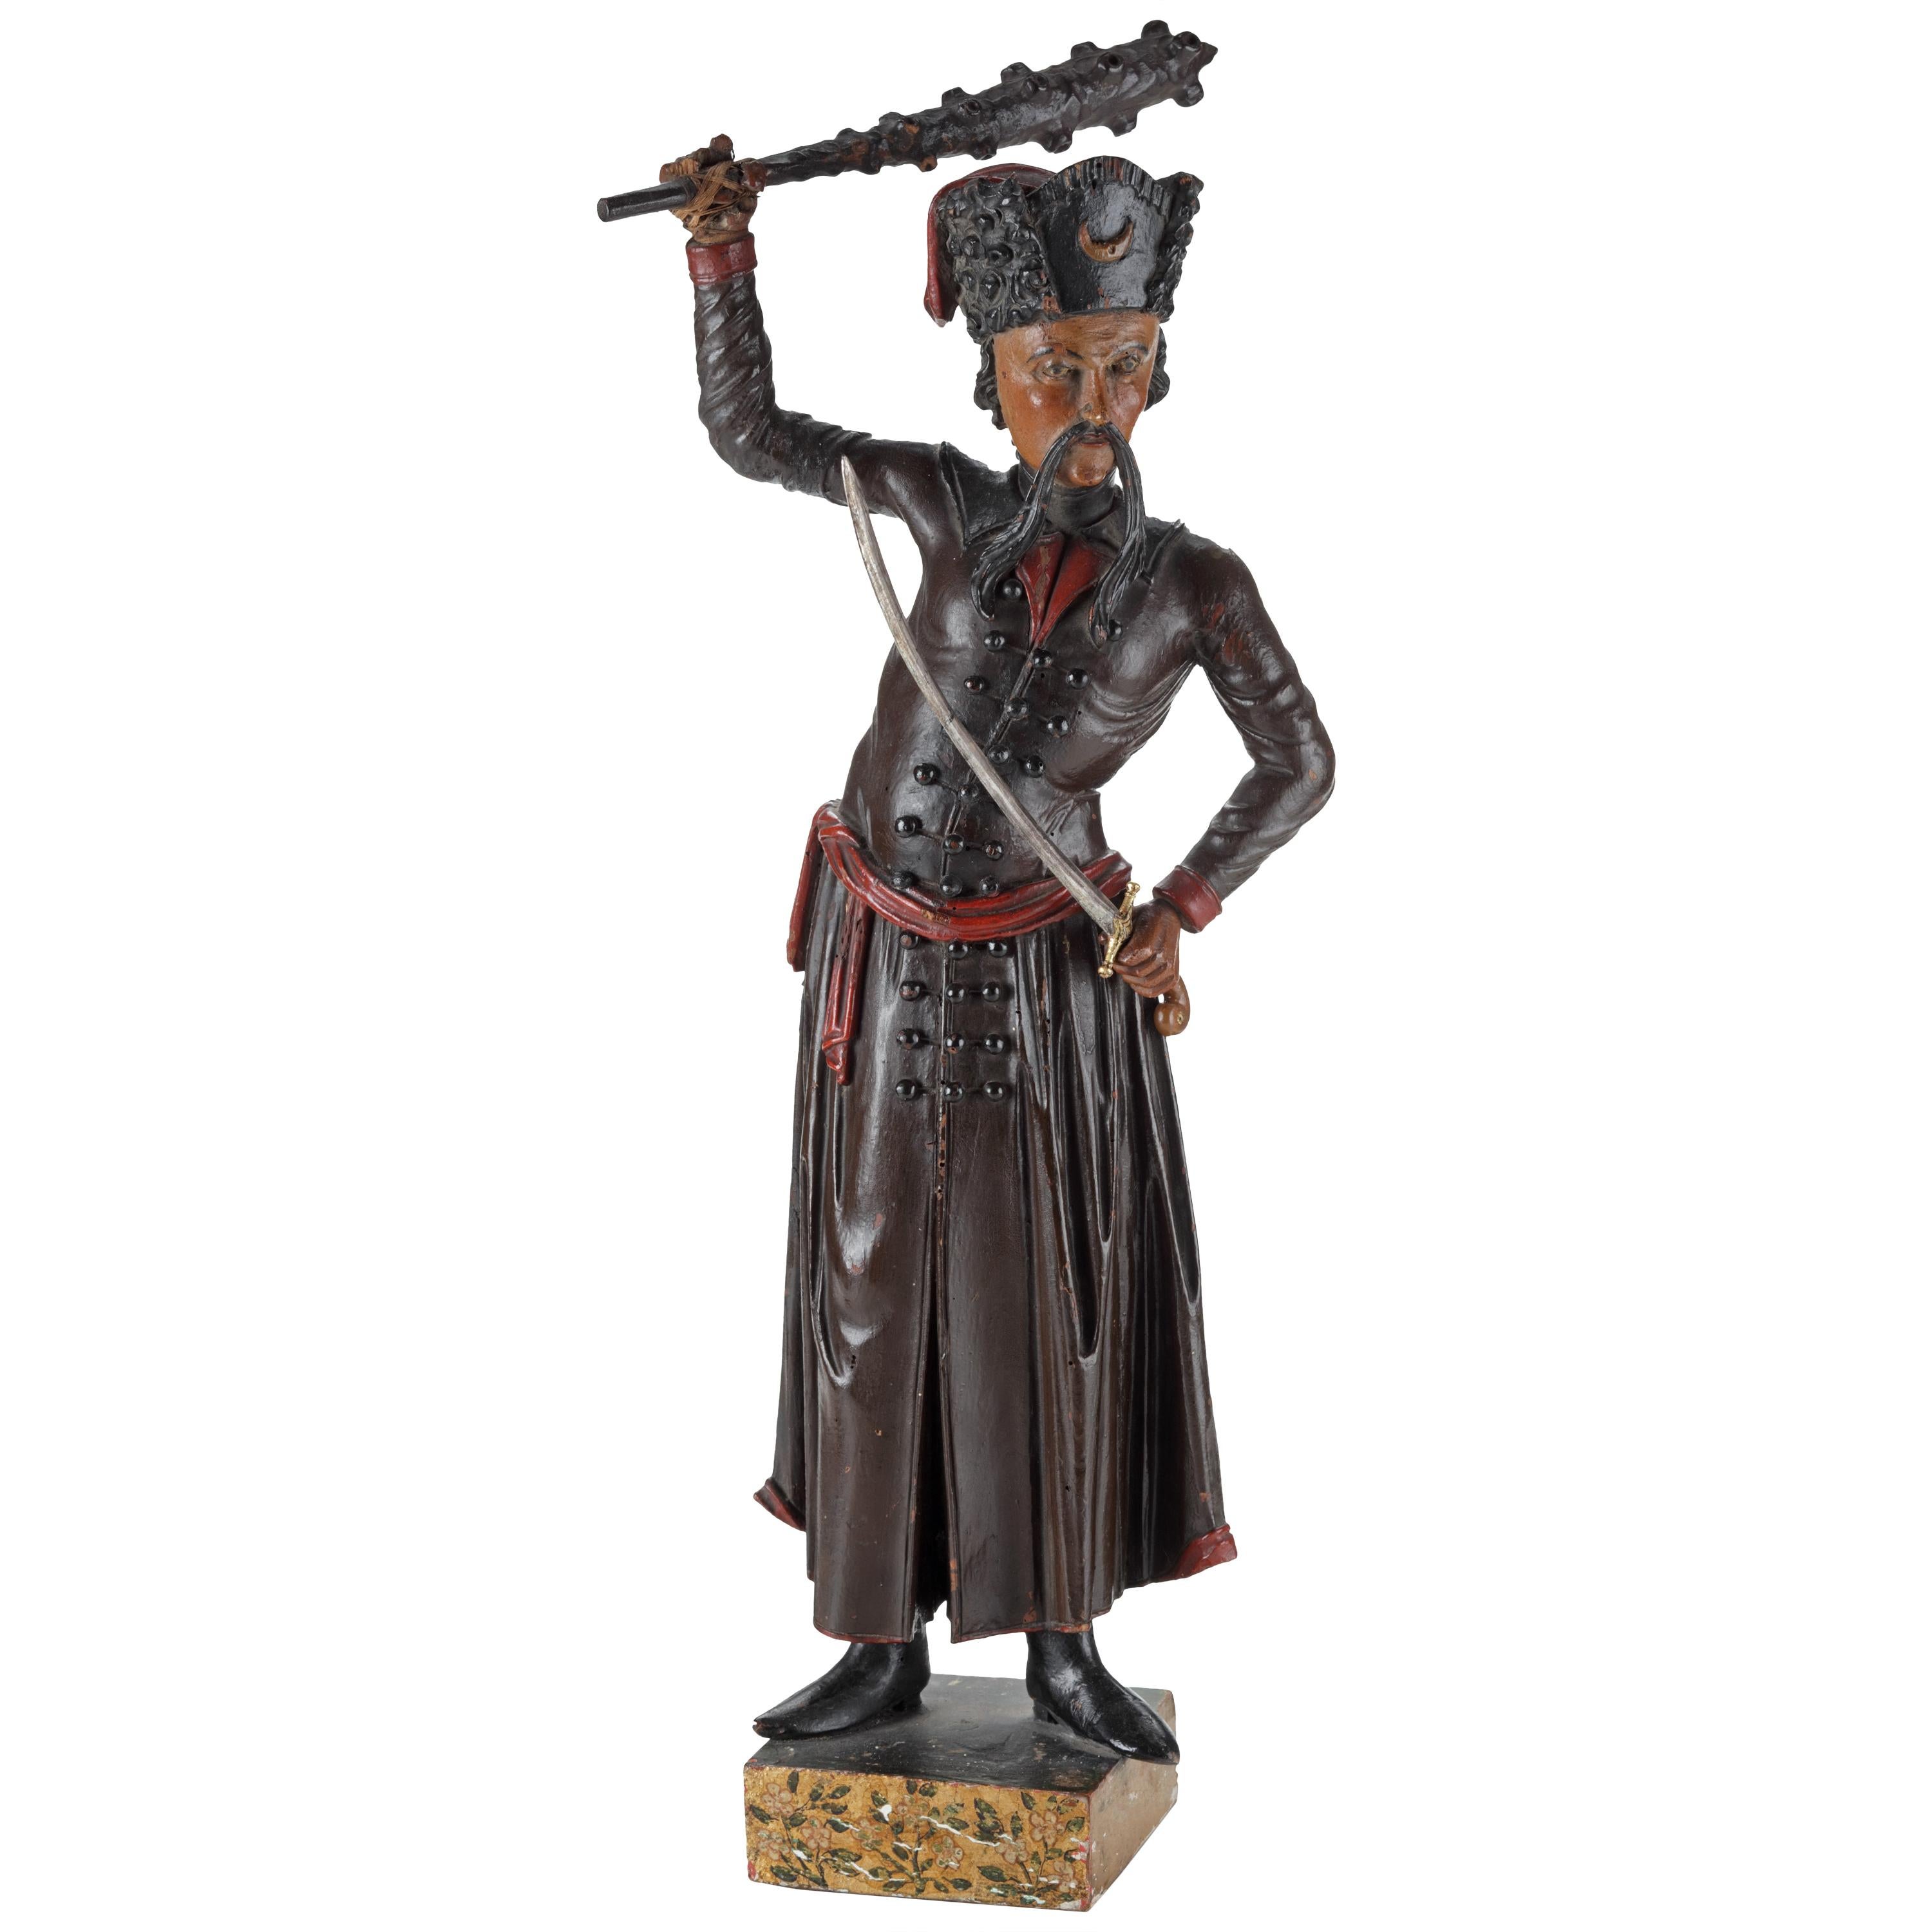 Orientalist Turkomania Wood Sculpture of an Ottoman, Early 19th Century For Sale